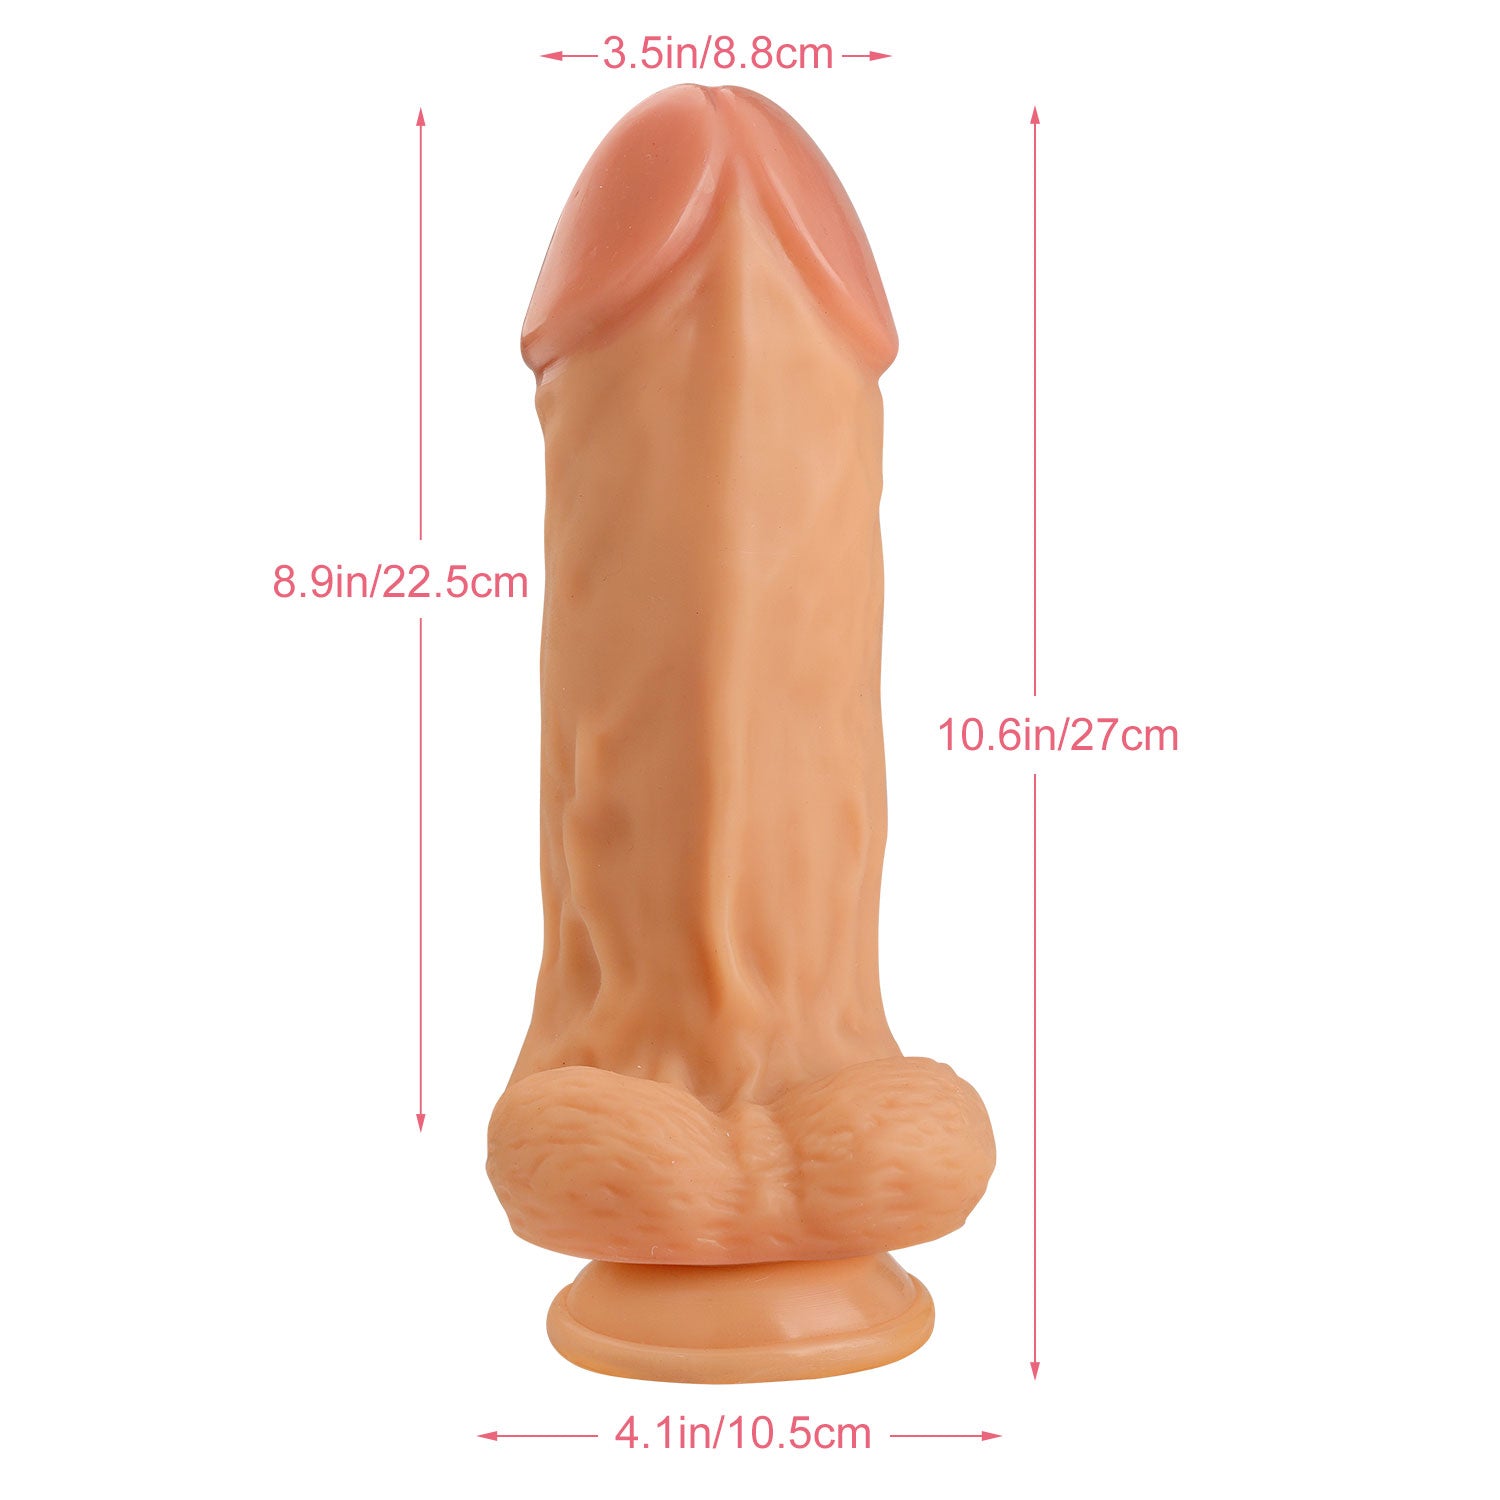 A77 Mega Chubby 10“ Realistic Suction Cup Dildo with Balls photo